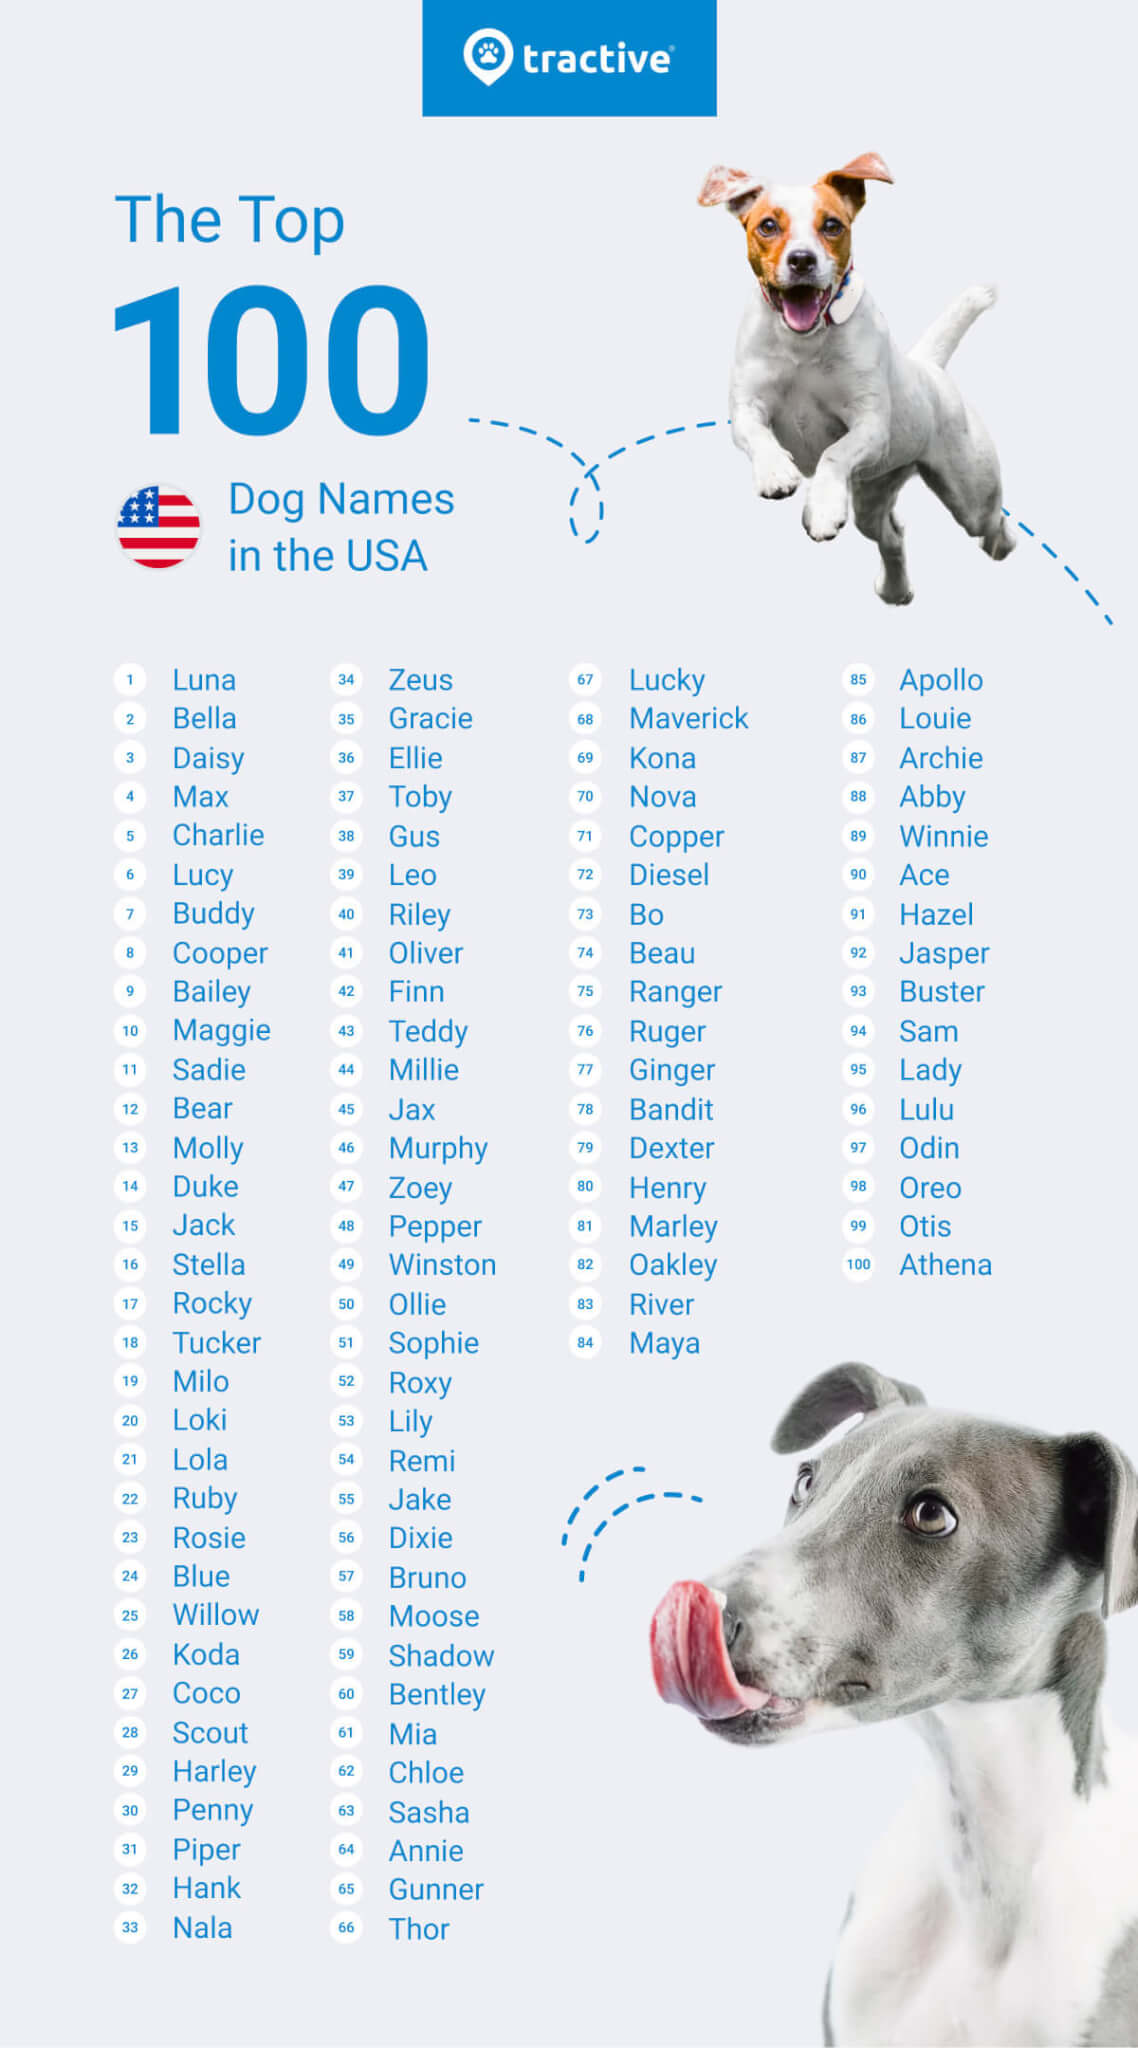 list of 100 top dog names in the USA according to Tractive infographic